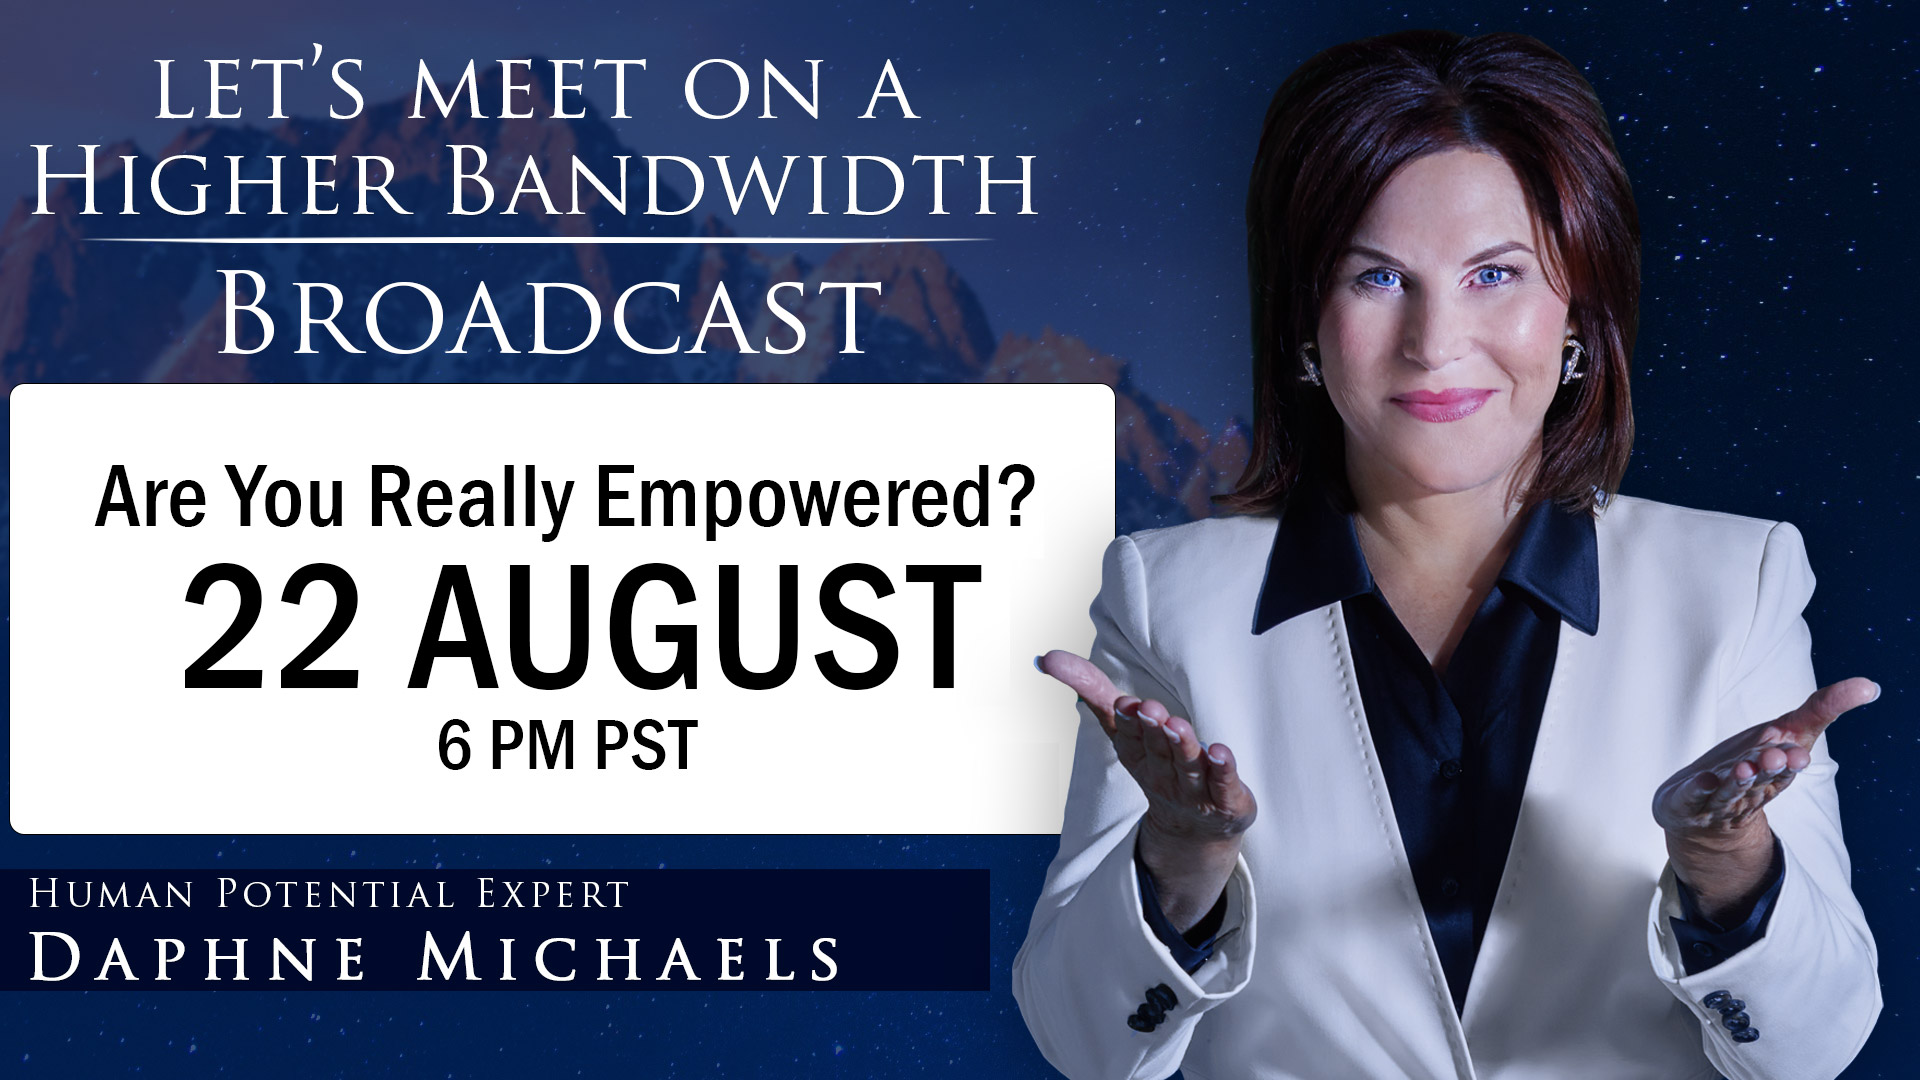 Are You Really Empowered?